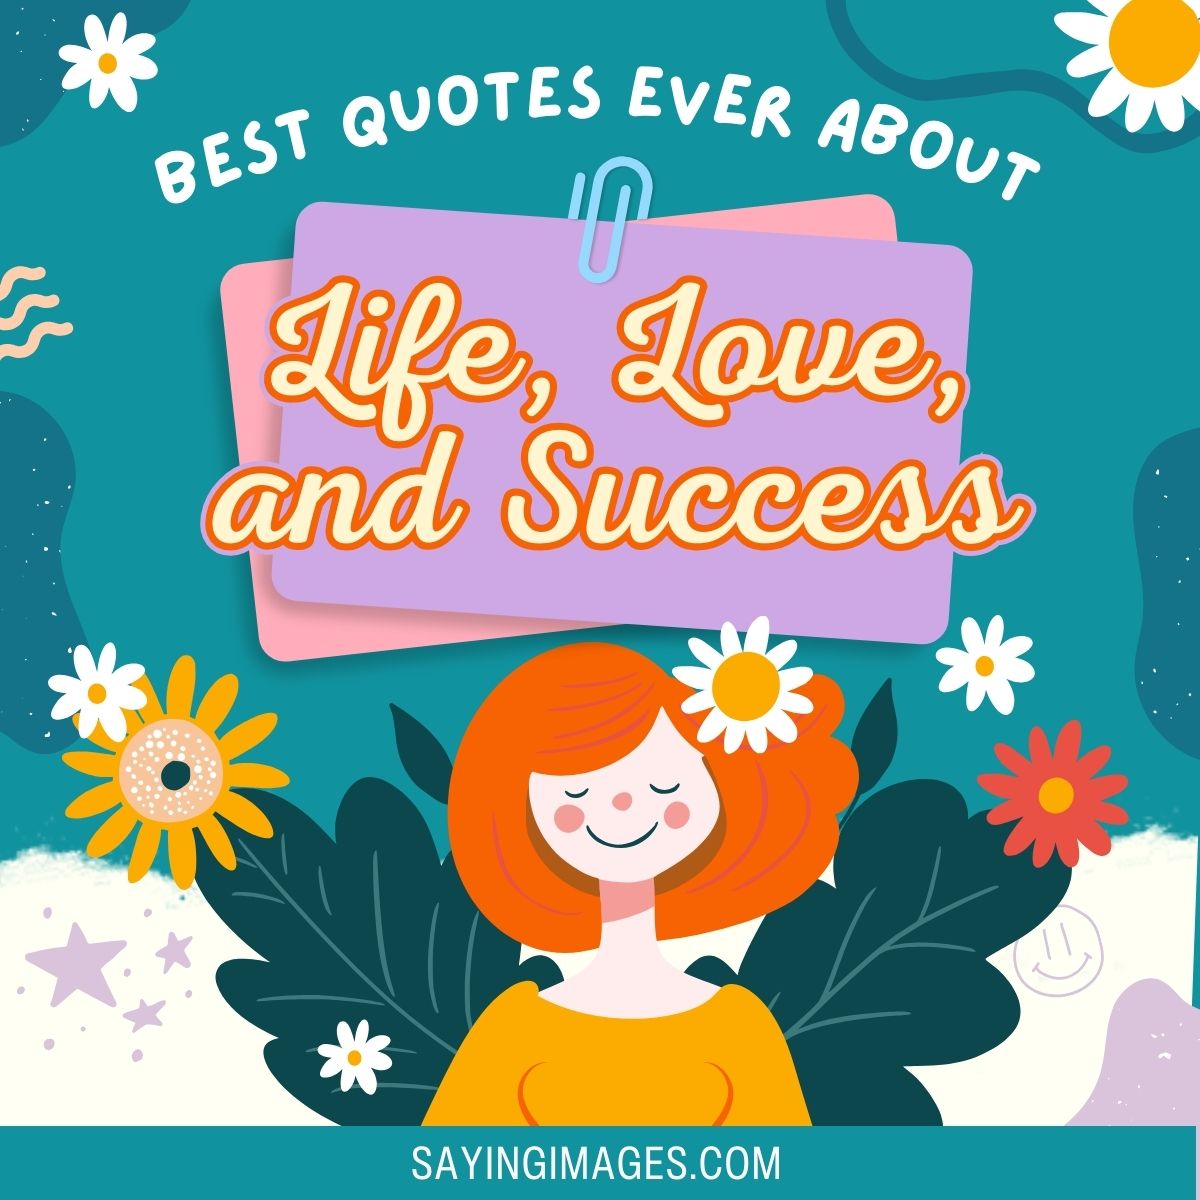 40 Best Quotes About Life, Love, and Success